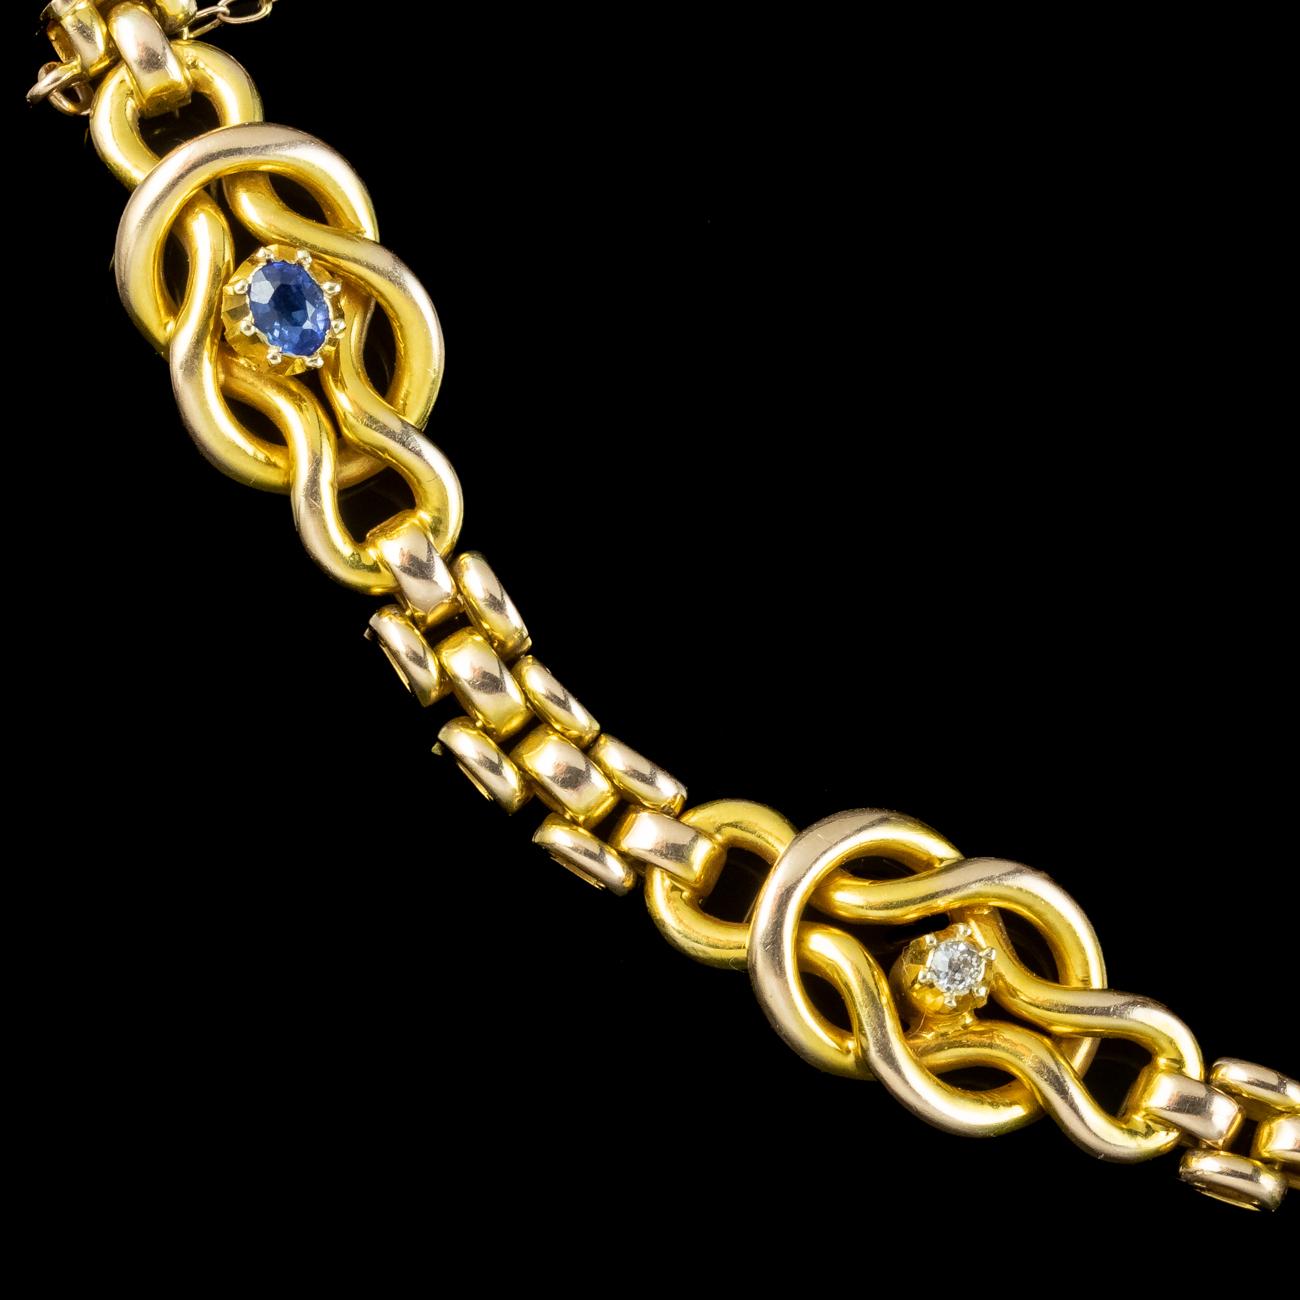 Antique Victorian Sapphire Diamond Love Knot Bracelet 15 Carat Gold In Good Condition For Sale In Kendal, GB